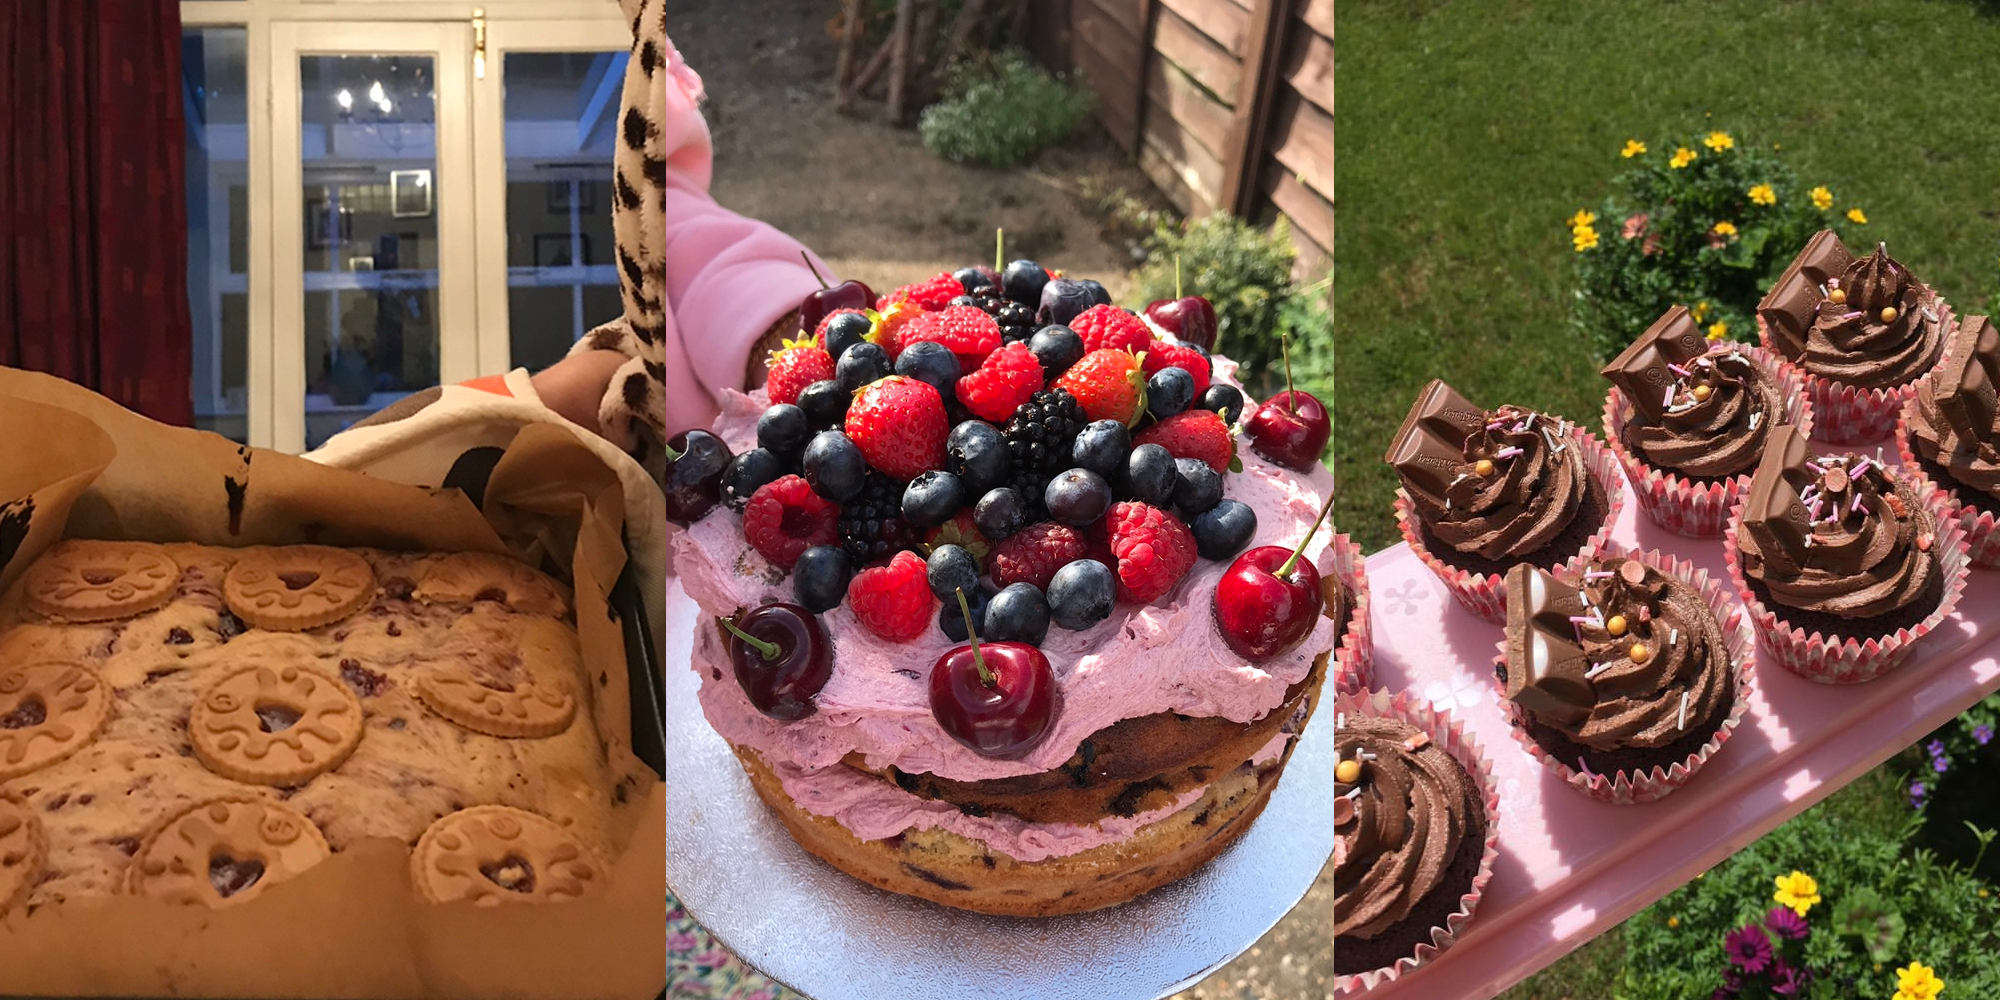 a collage of three baked goods, including a tray bake with jammy dogers, a cake with fresh fruit on top and chocolate cupcakes